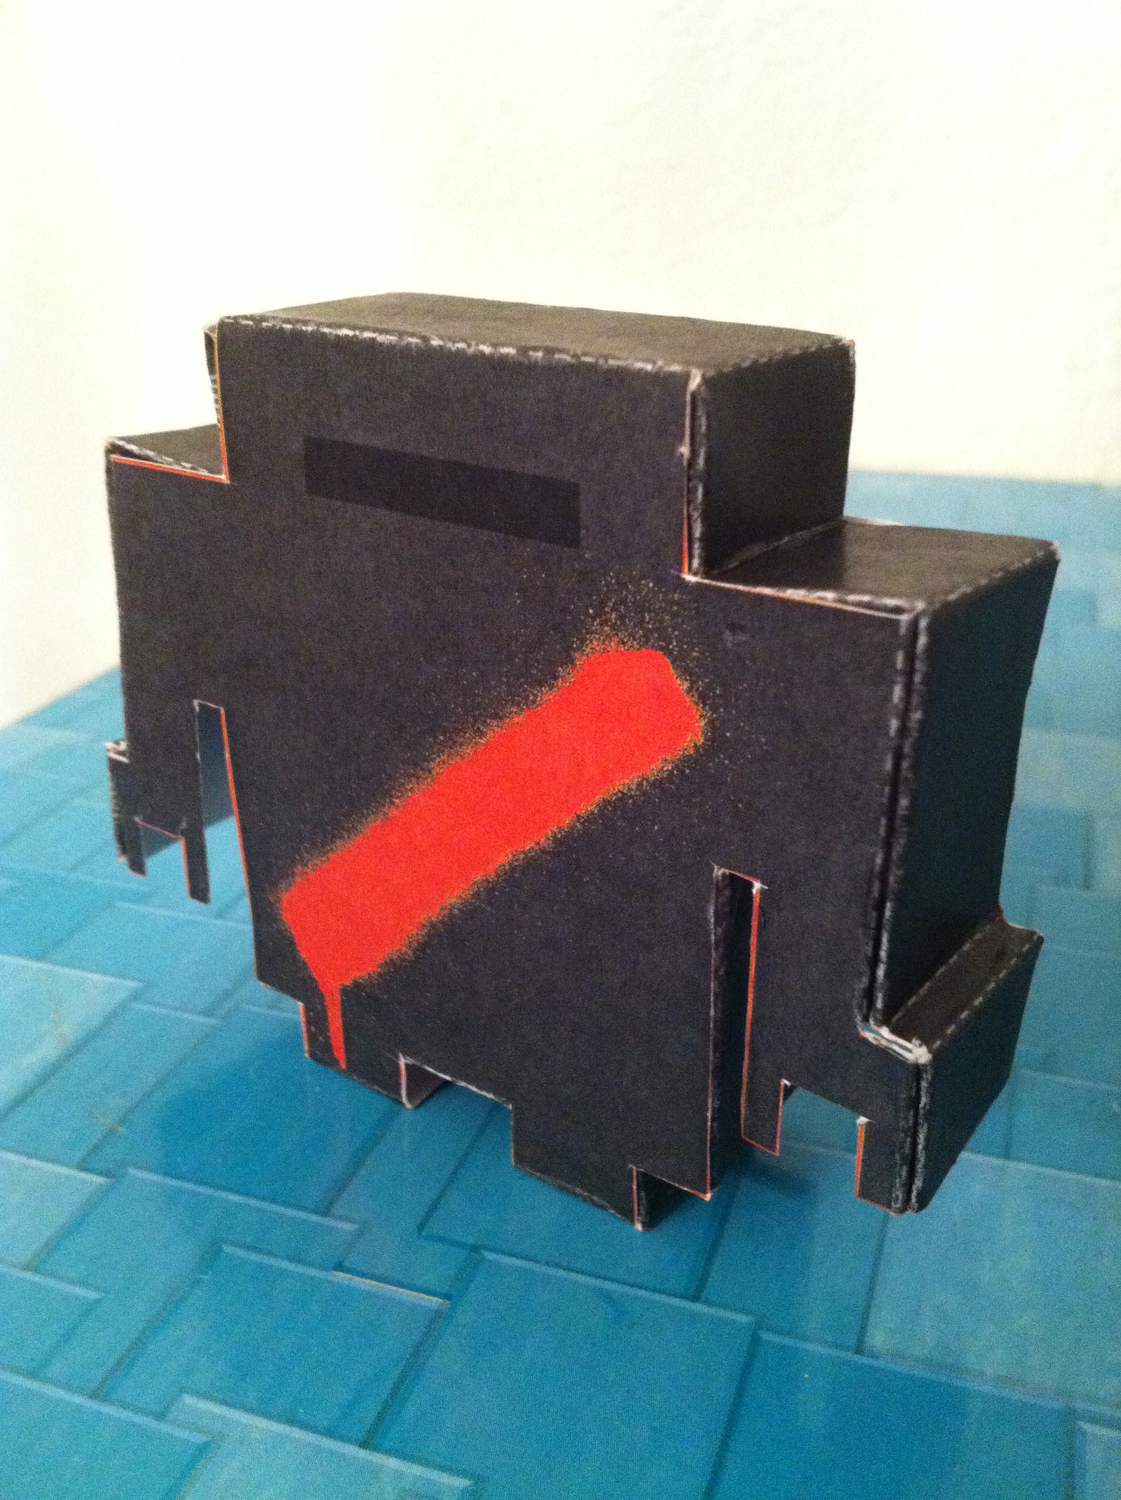 Make your own papercraft Robot